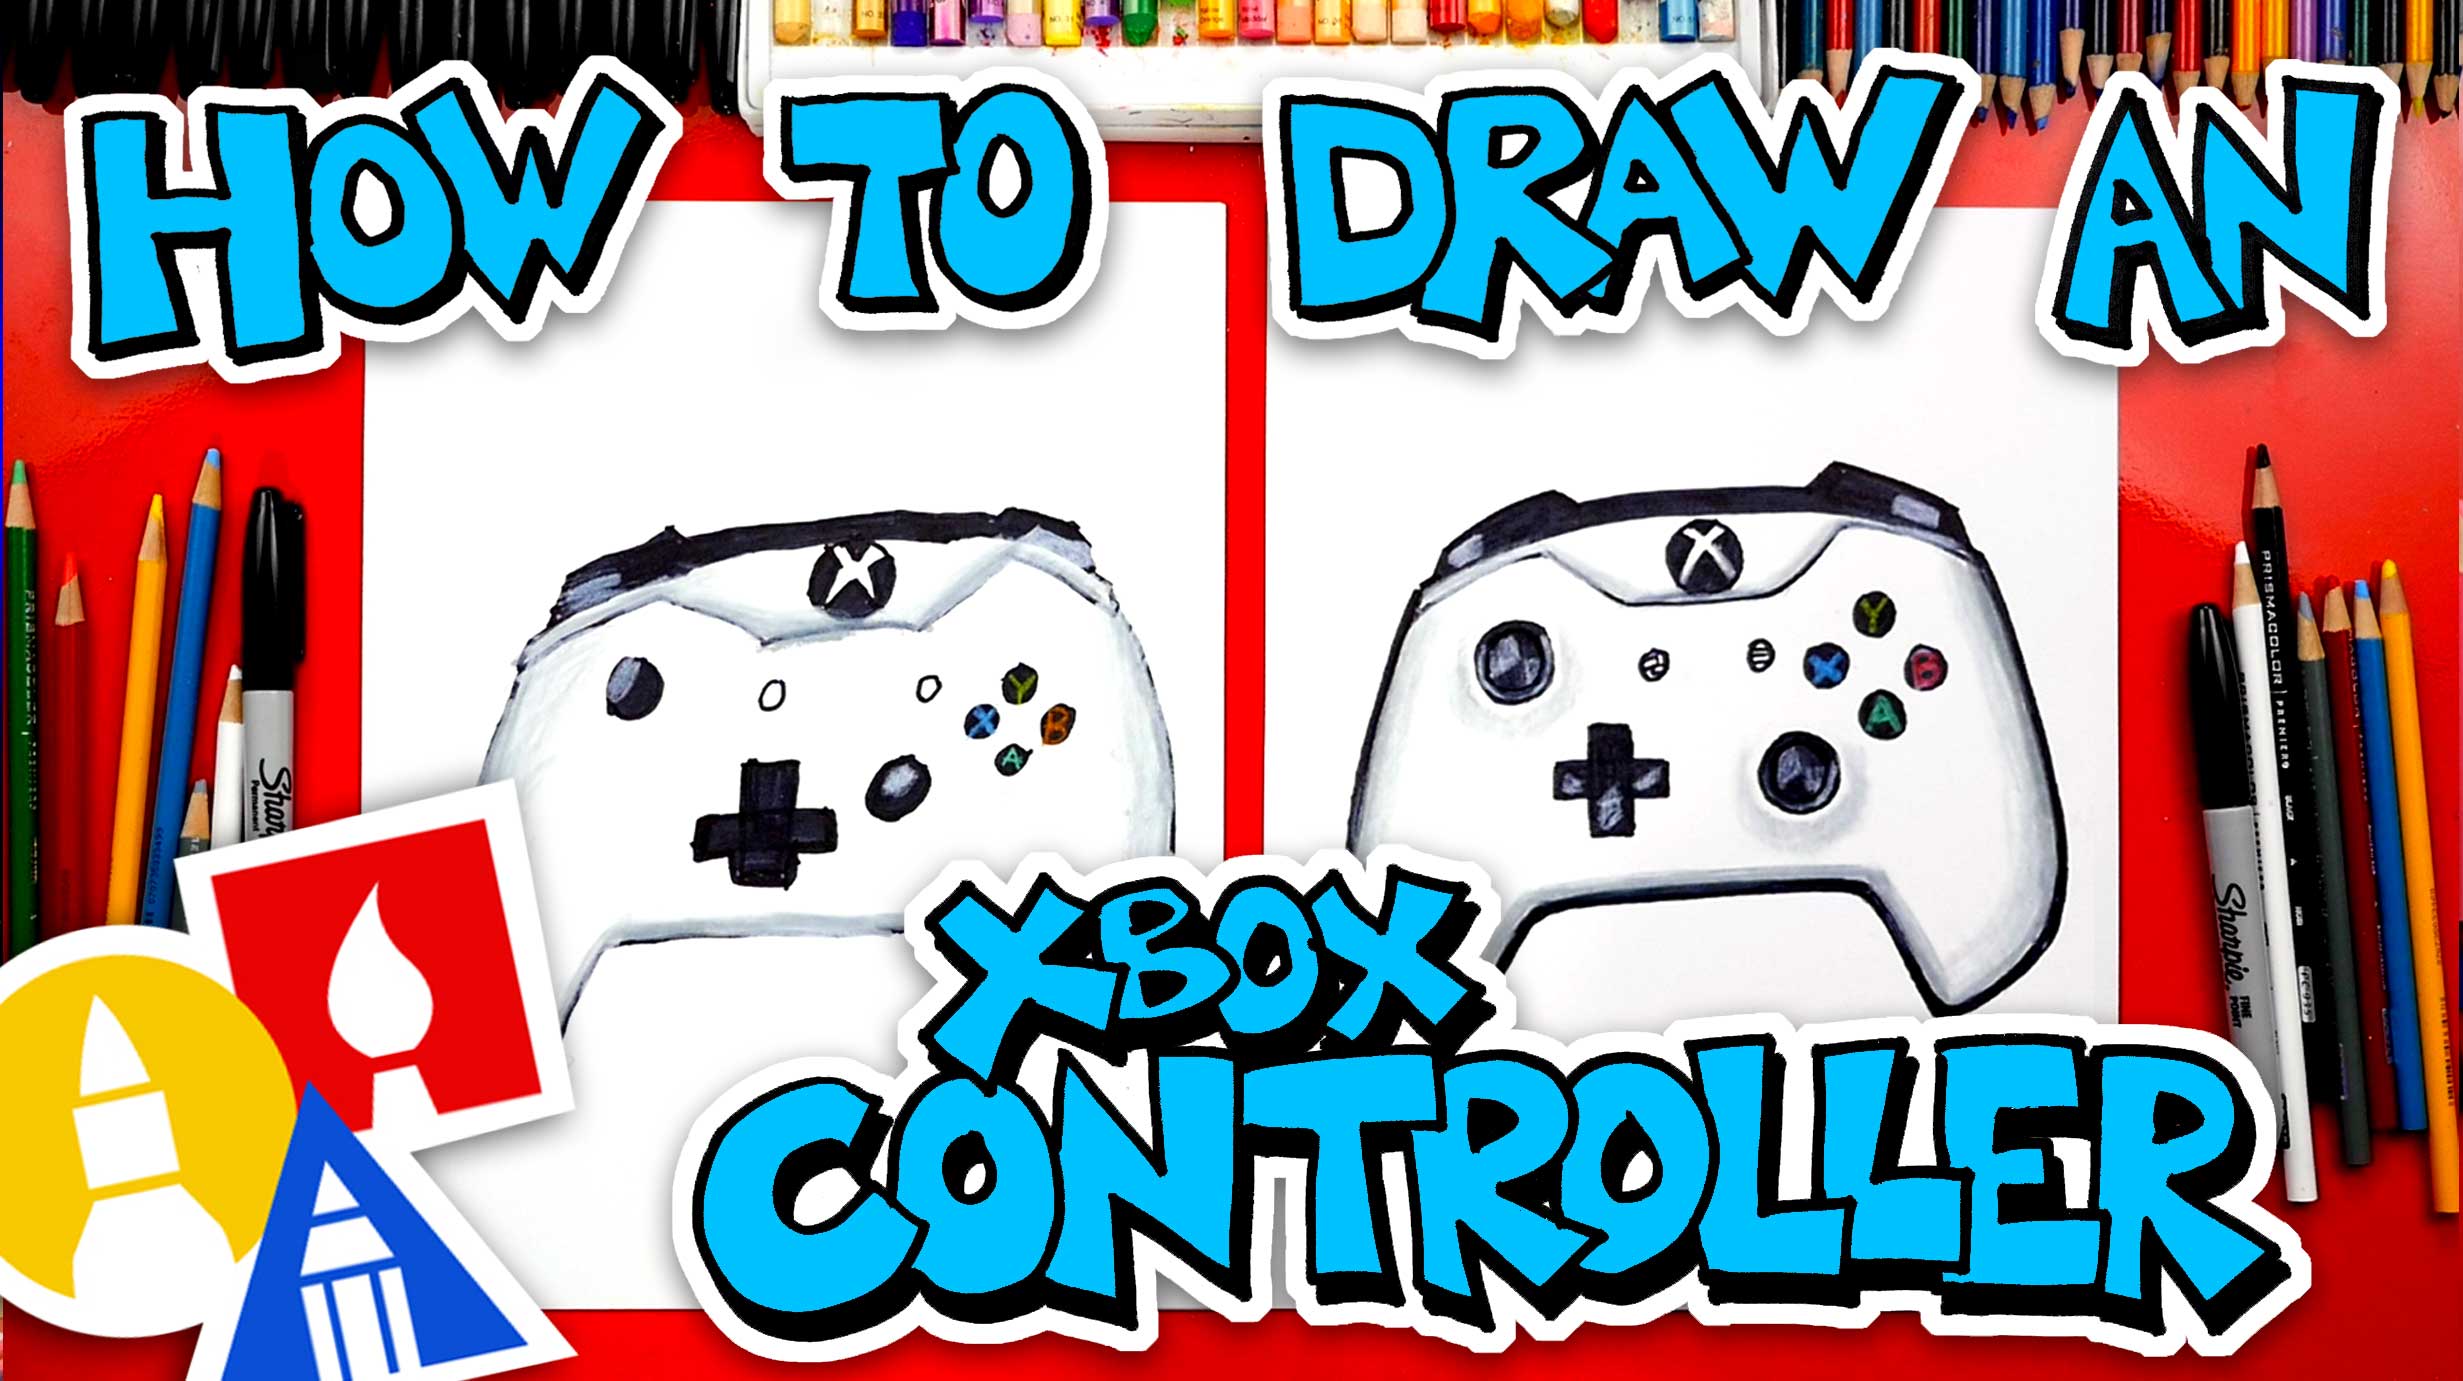 How To Draw An Xbox Controller - Art For Kids Hub